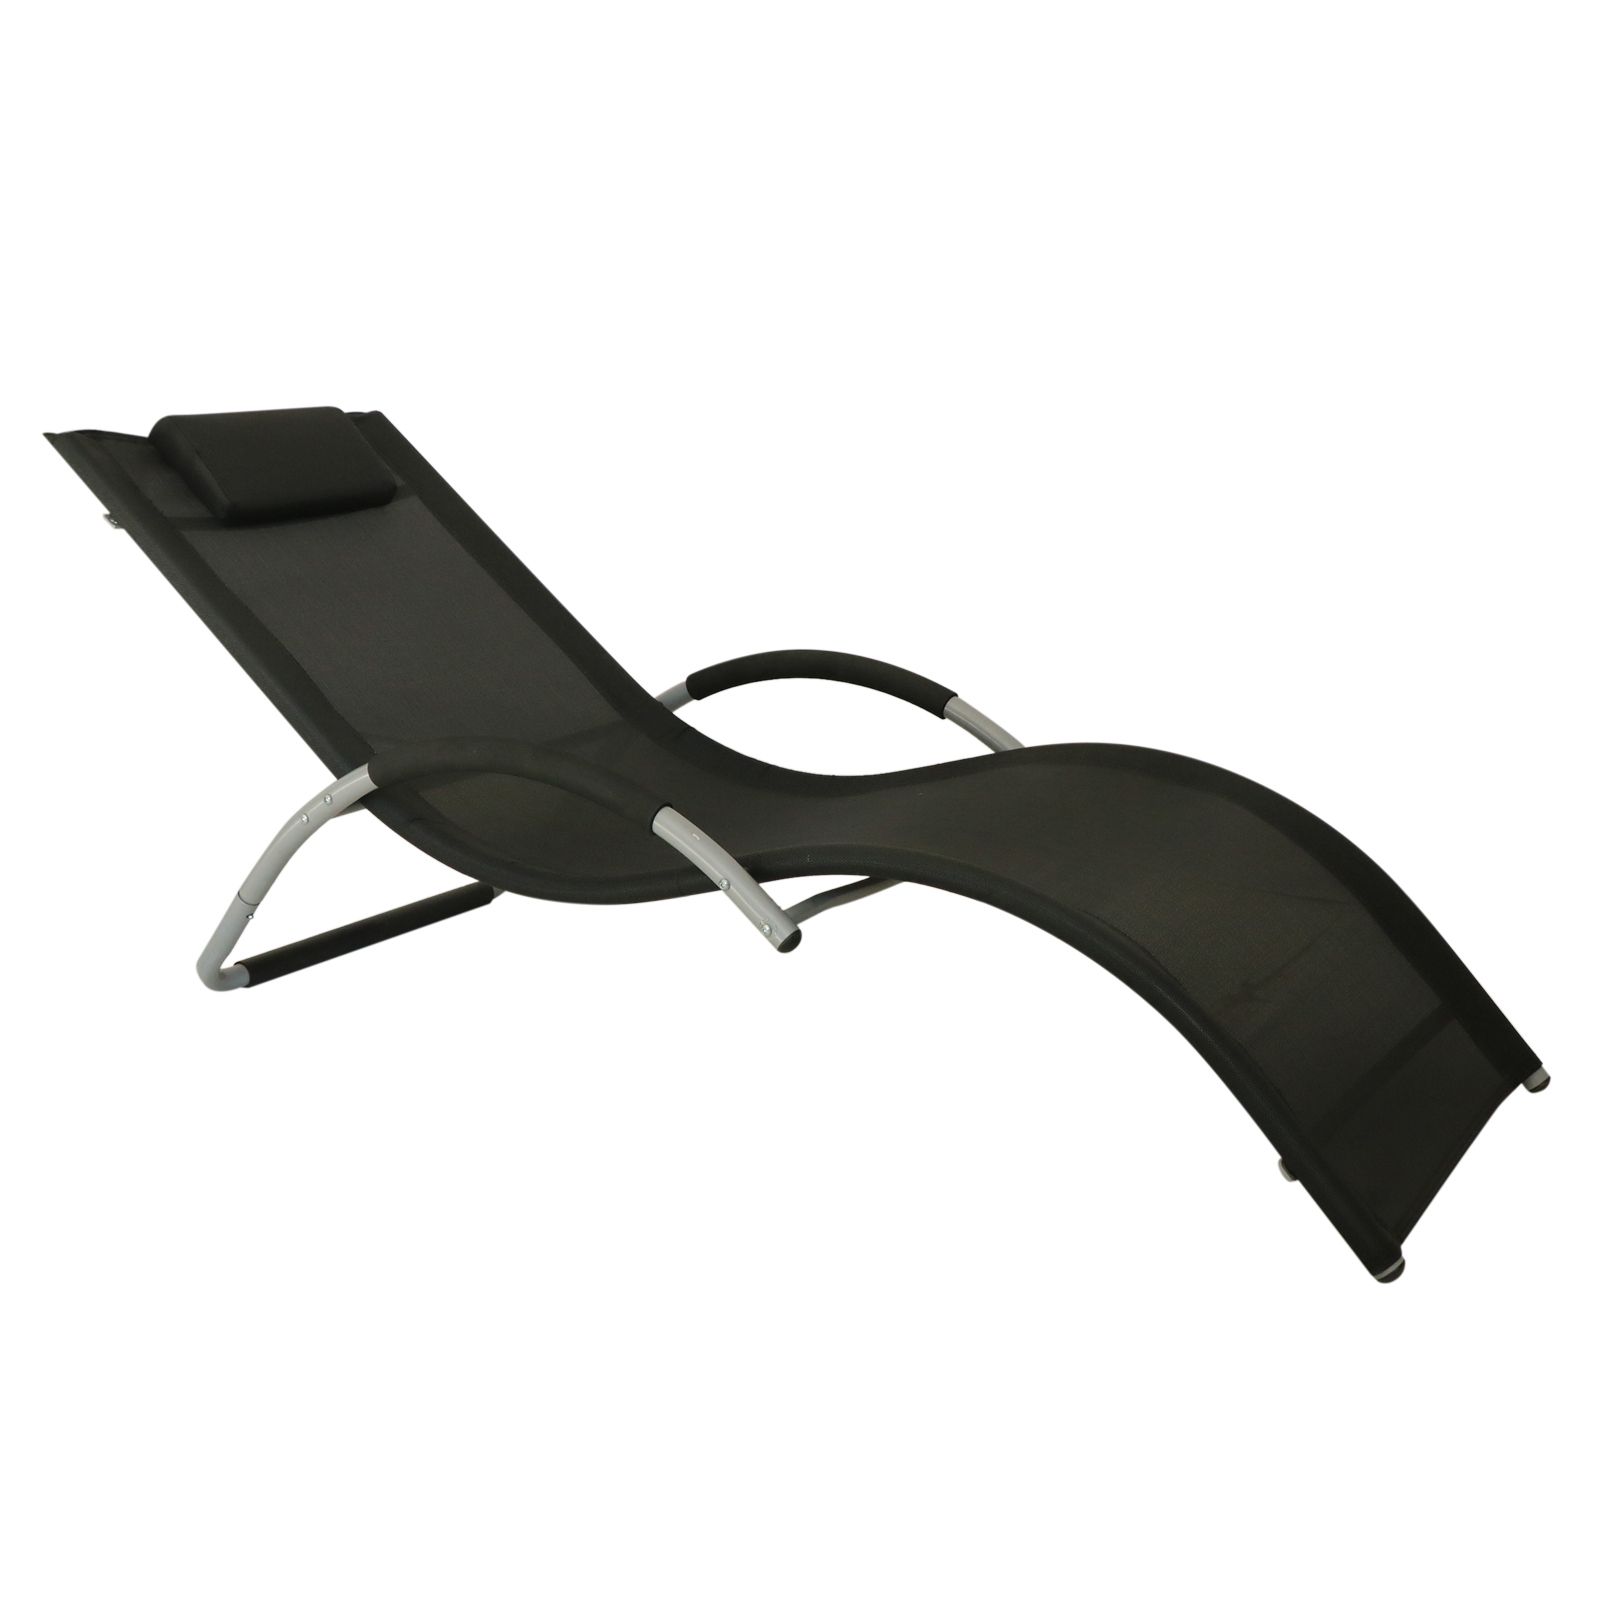 Outsunny Aluminum Mesh Fabric Outdoor Curved Chaise Sun Lounge Chair – Black Inside Well Known Curved Folding Chaise Loungers (View 15 of 25)